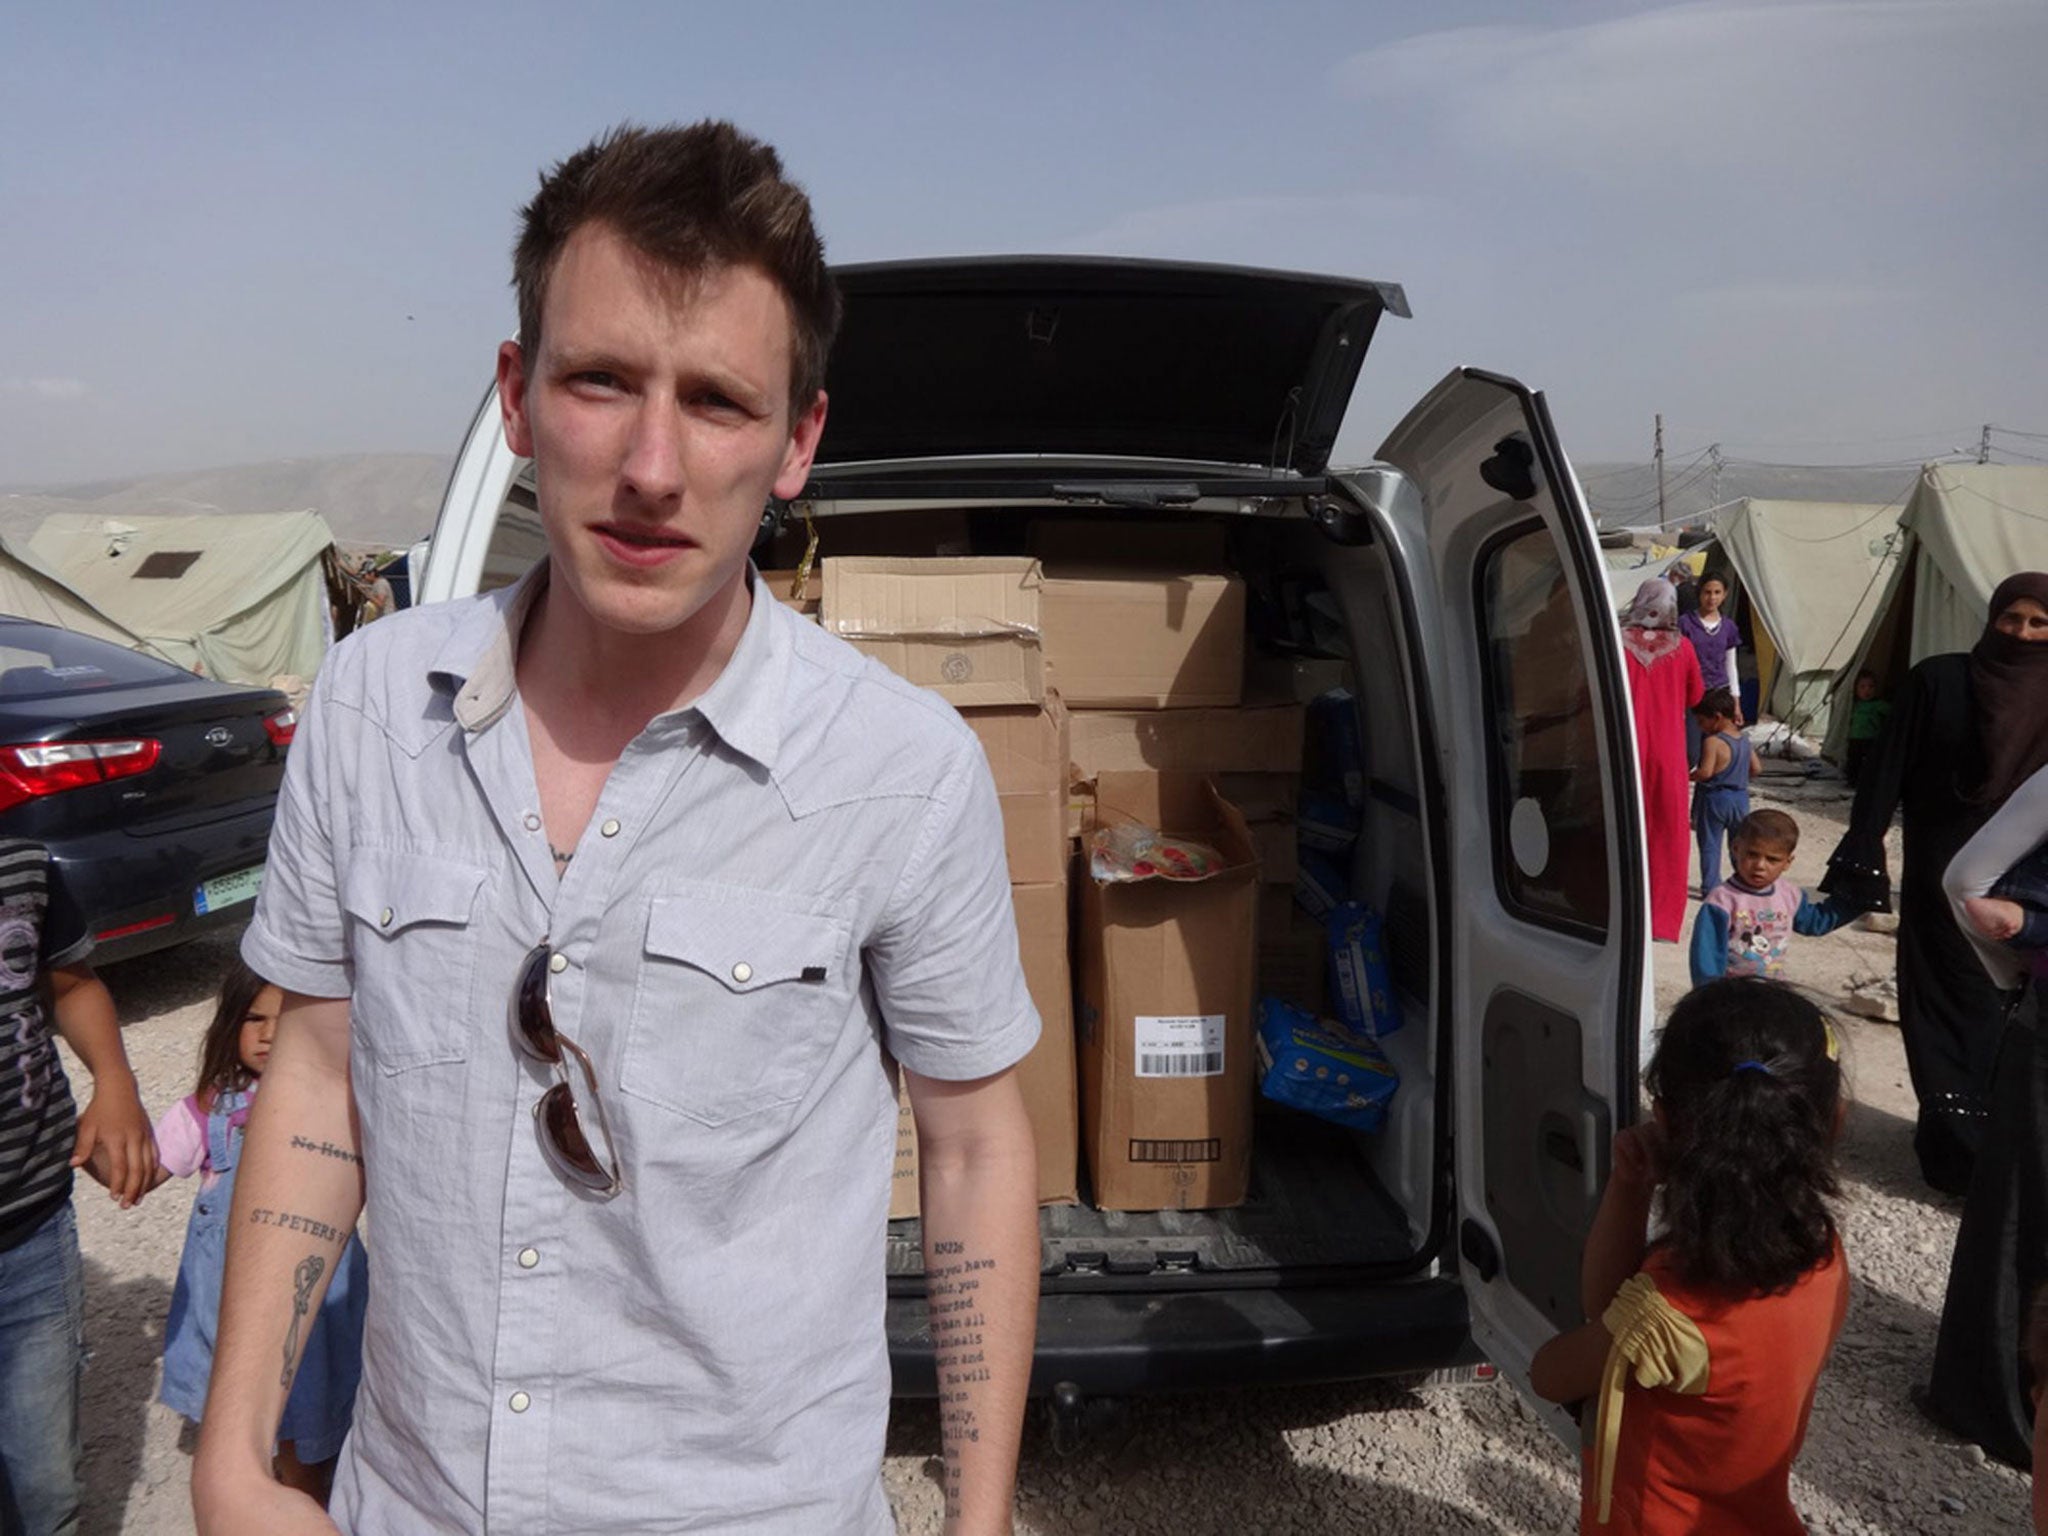 The US aid worker Peter Kassig in Syria, where he was held hostage in 2013